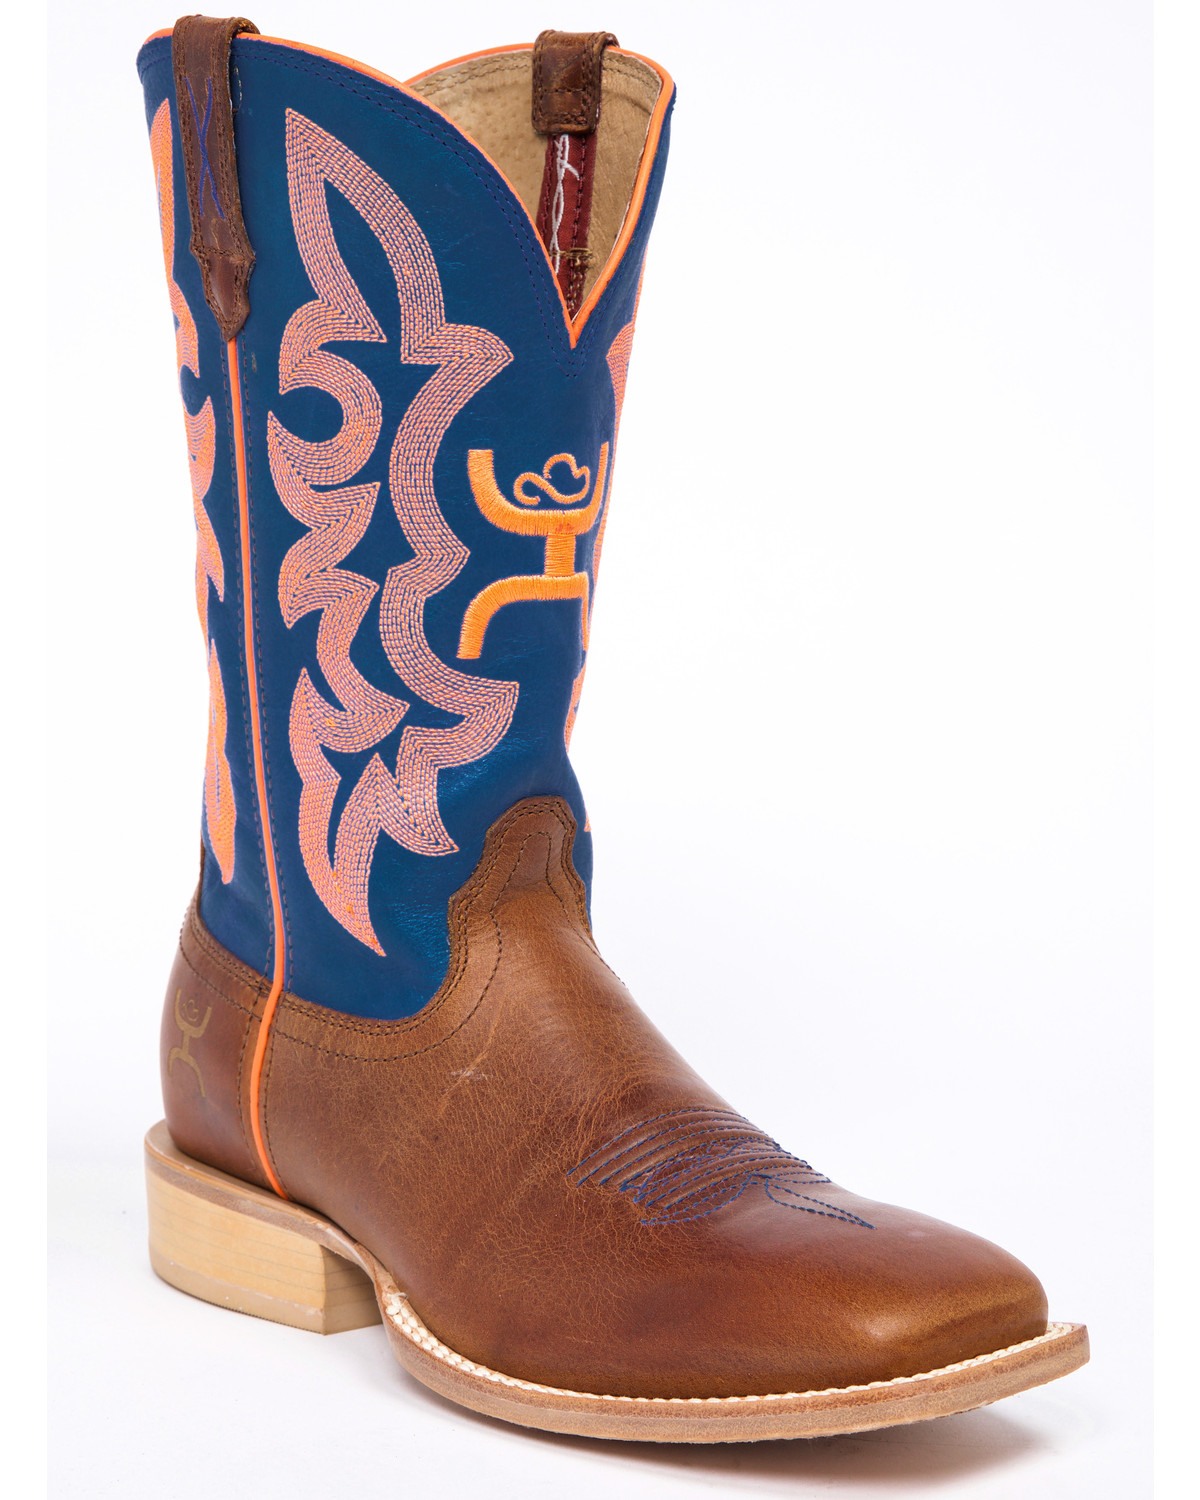 Hooey by Twisted X Neon Blue Cowgirl 